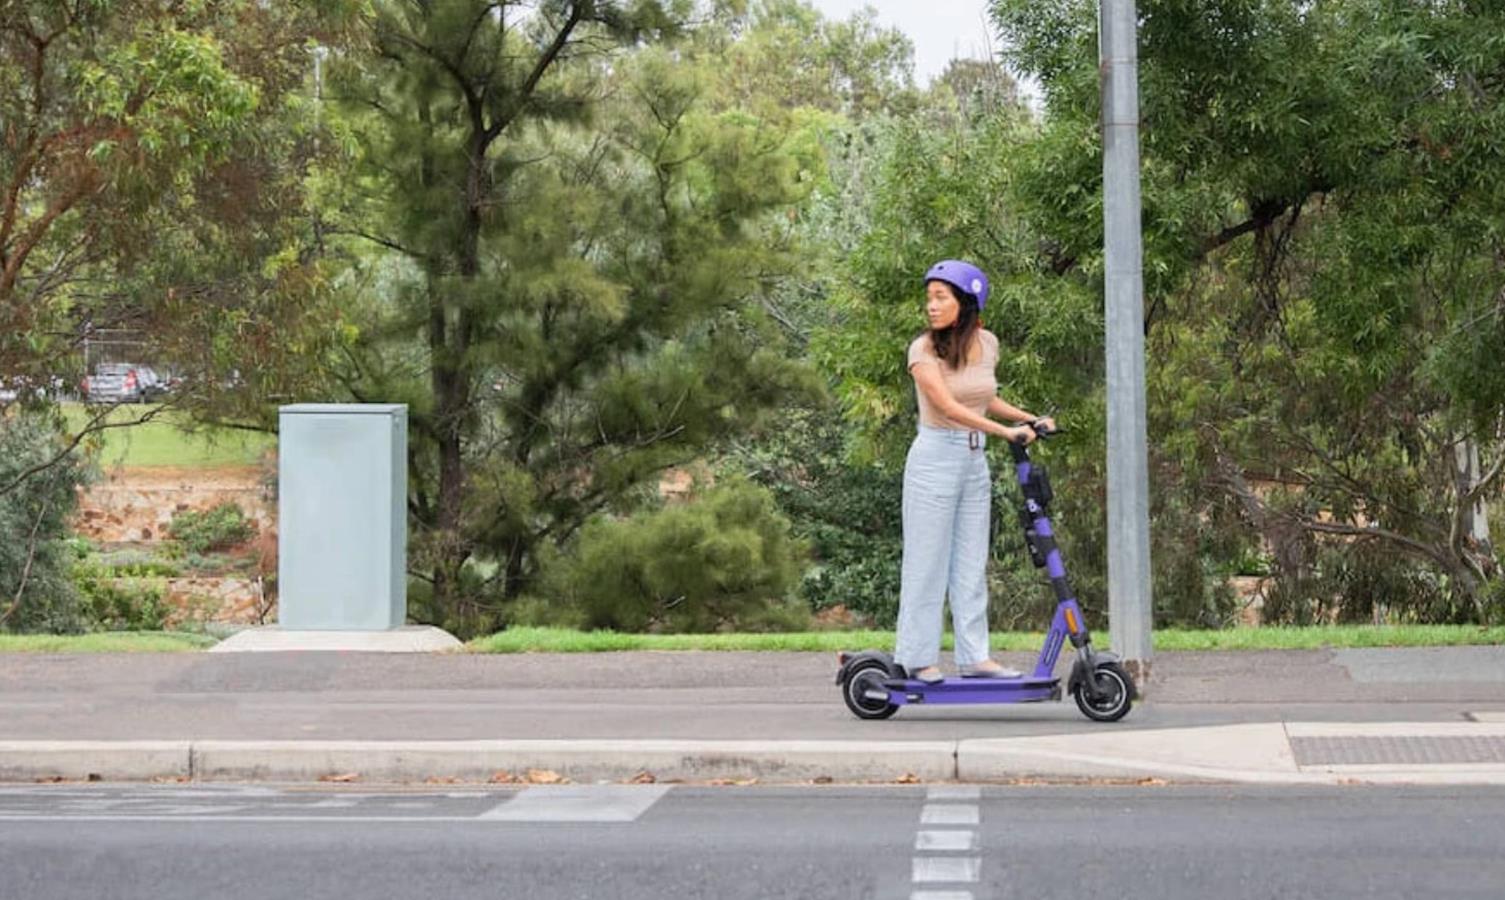 Artificial intelligence upholding the law.  Pedestrian Shield already restricts scooter users